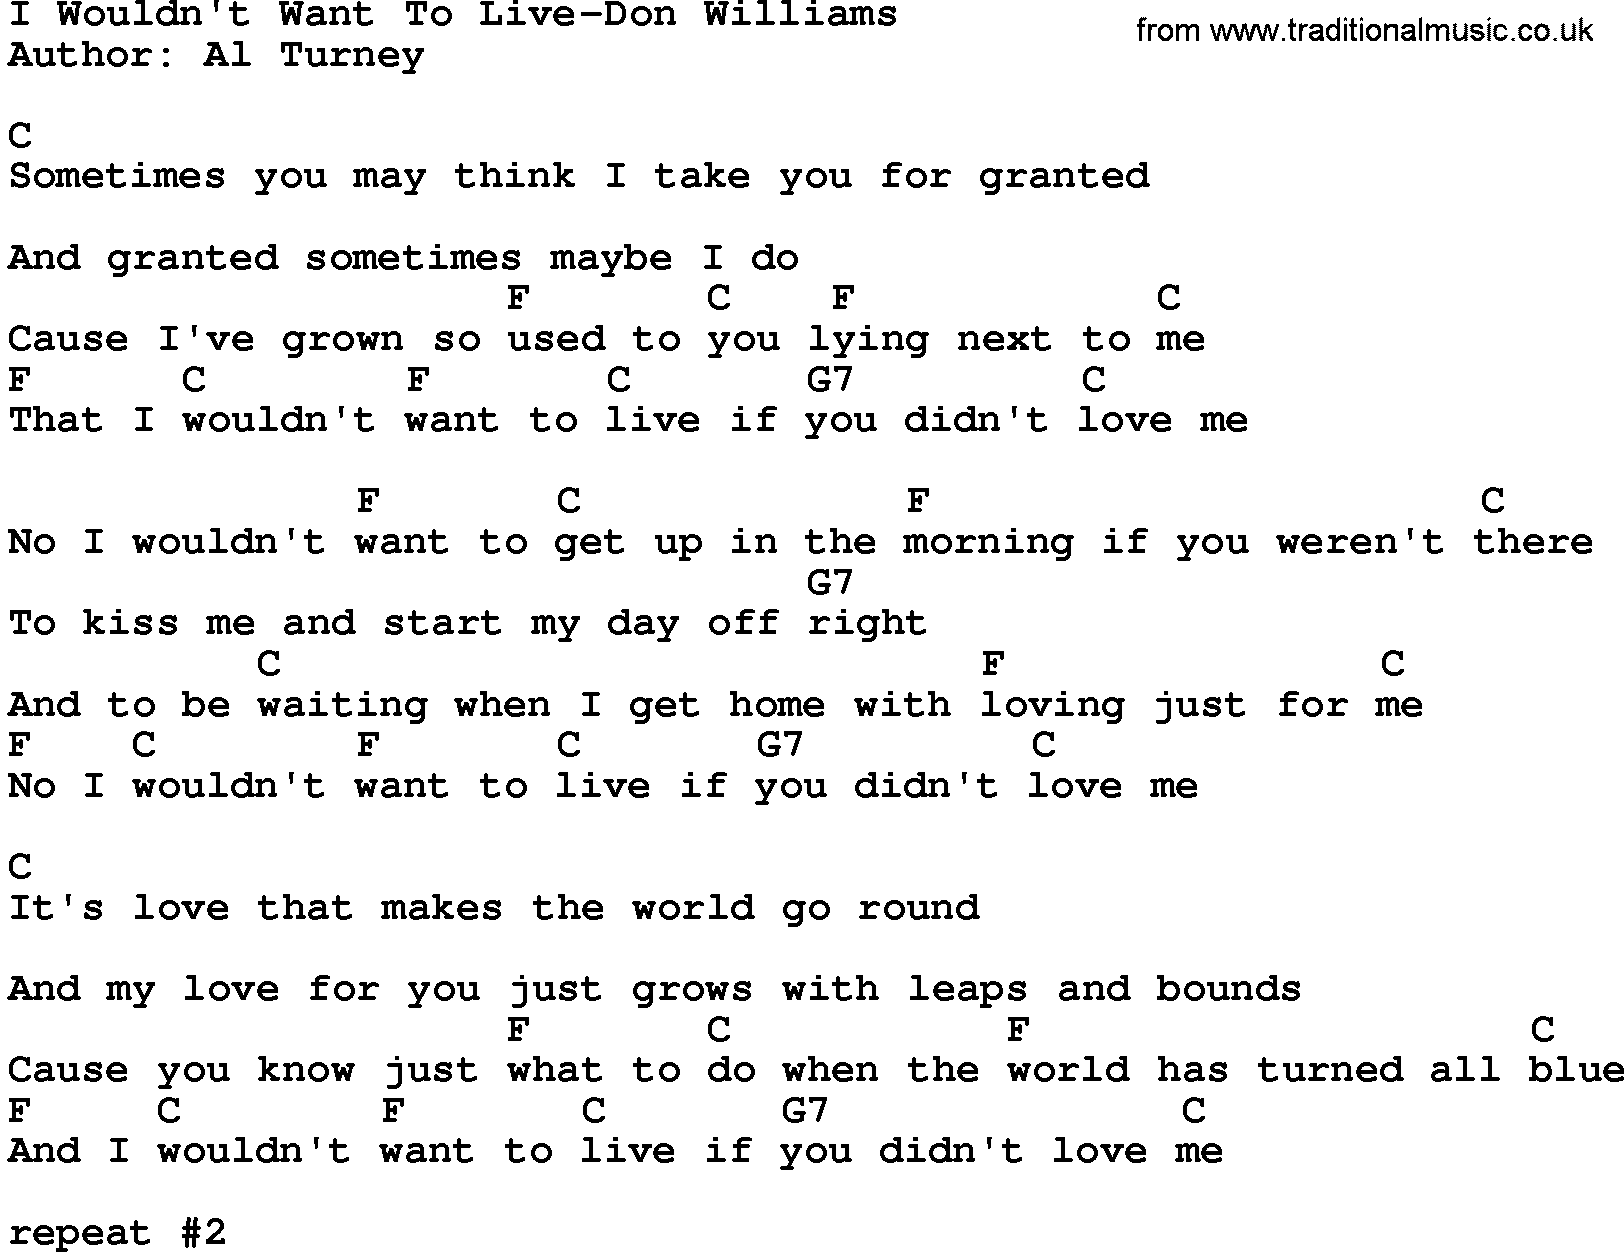 Country music song: I Wouldn't Want To Live-Don Williams lyrics and chords